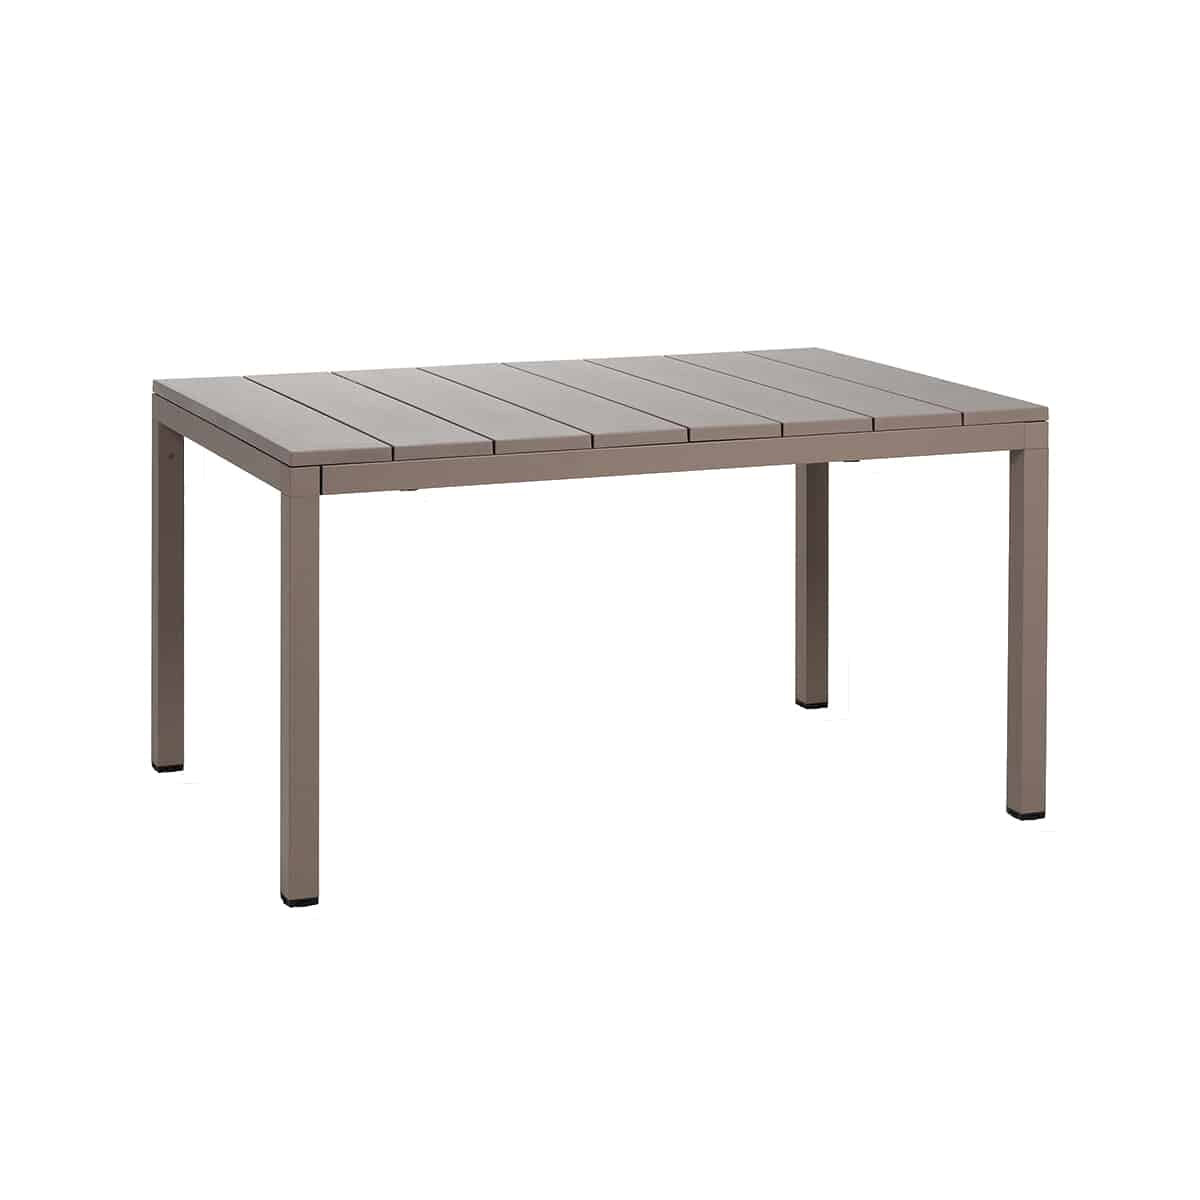 Rio Extendable Outdoor Dining Table Product Image